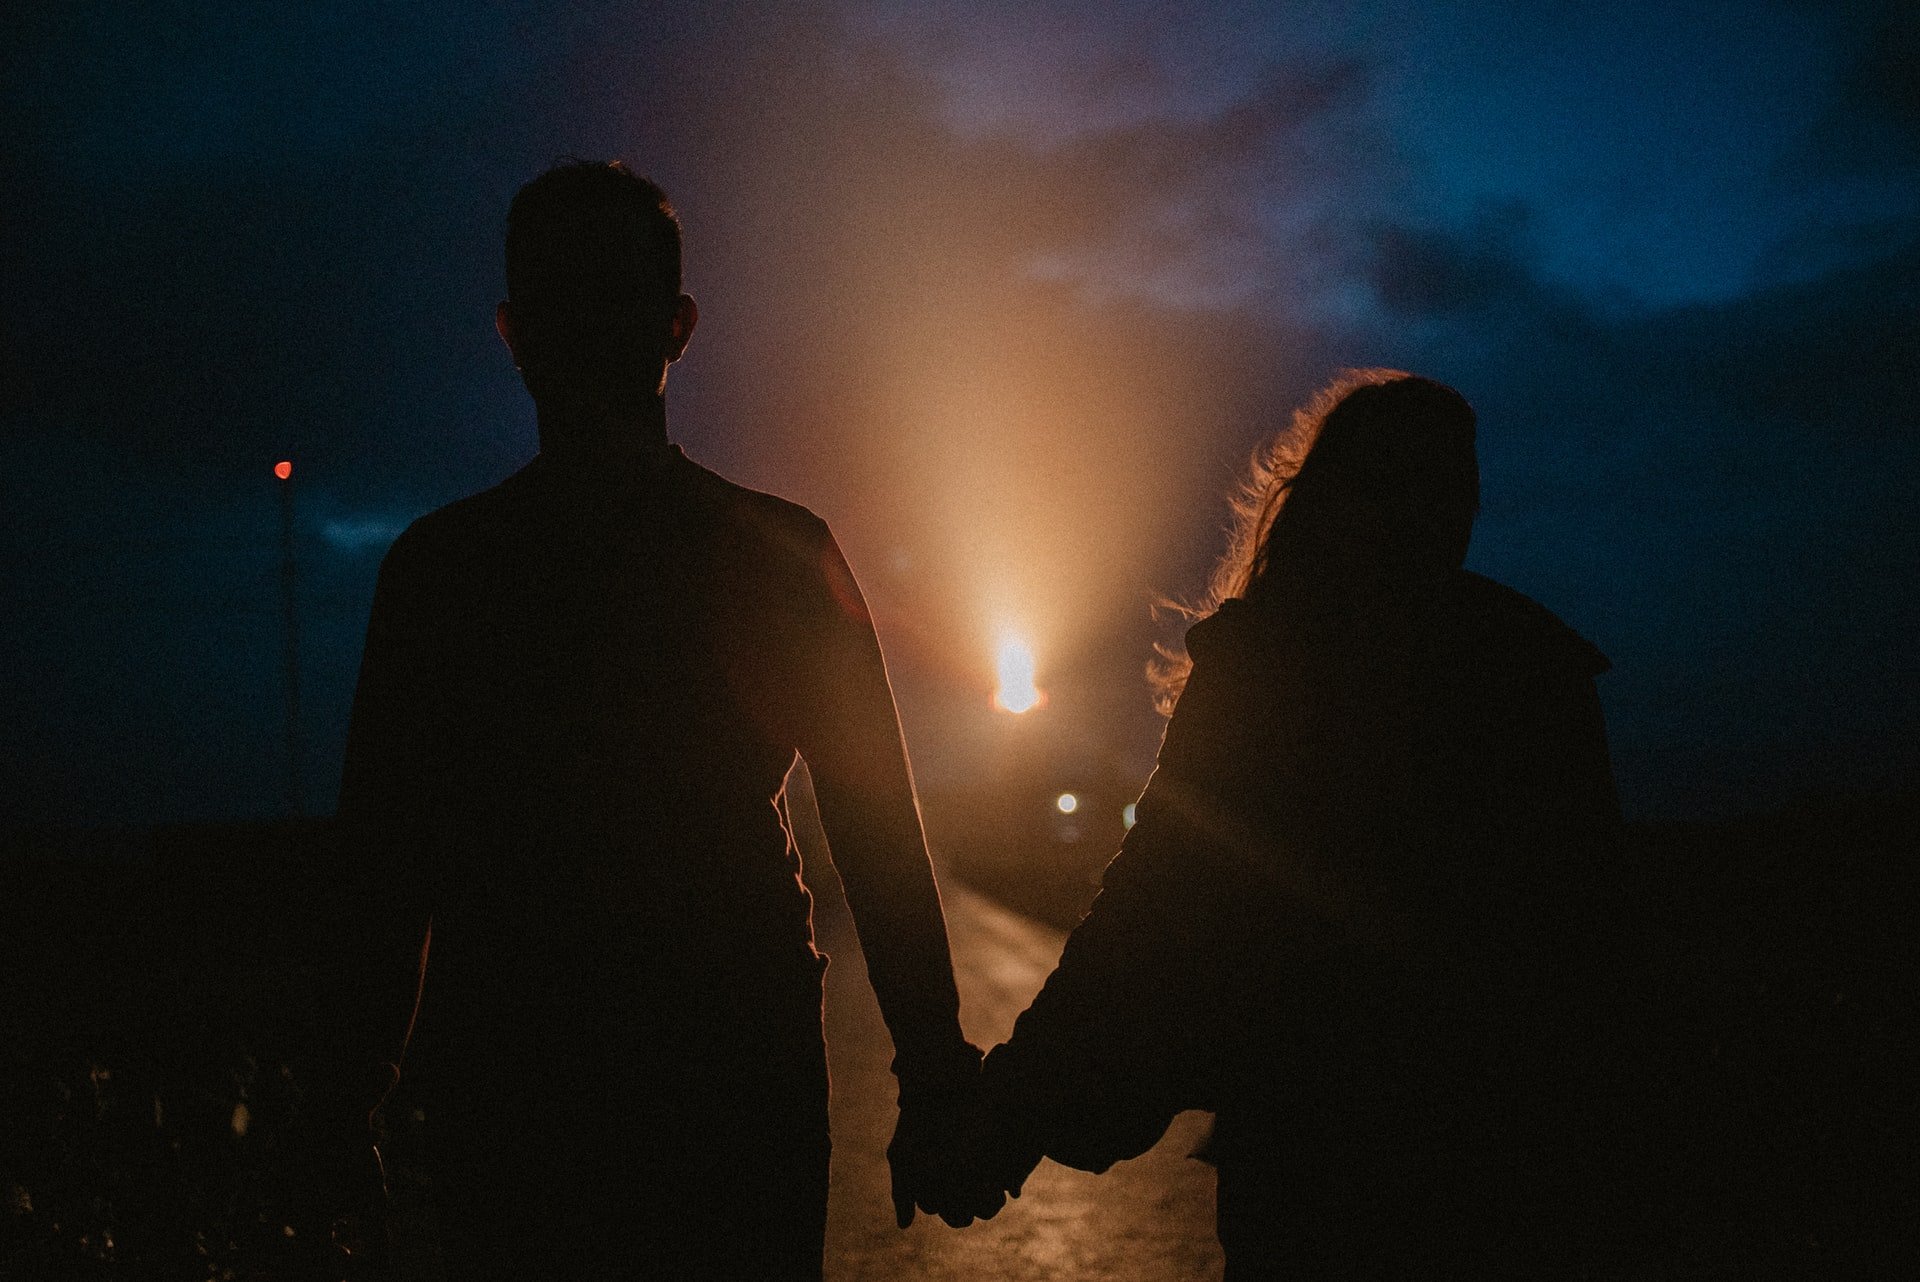 She held OP's hand while walking home | Source: Unsplash